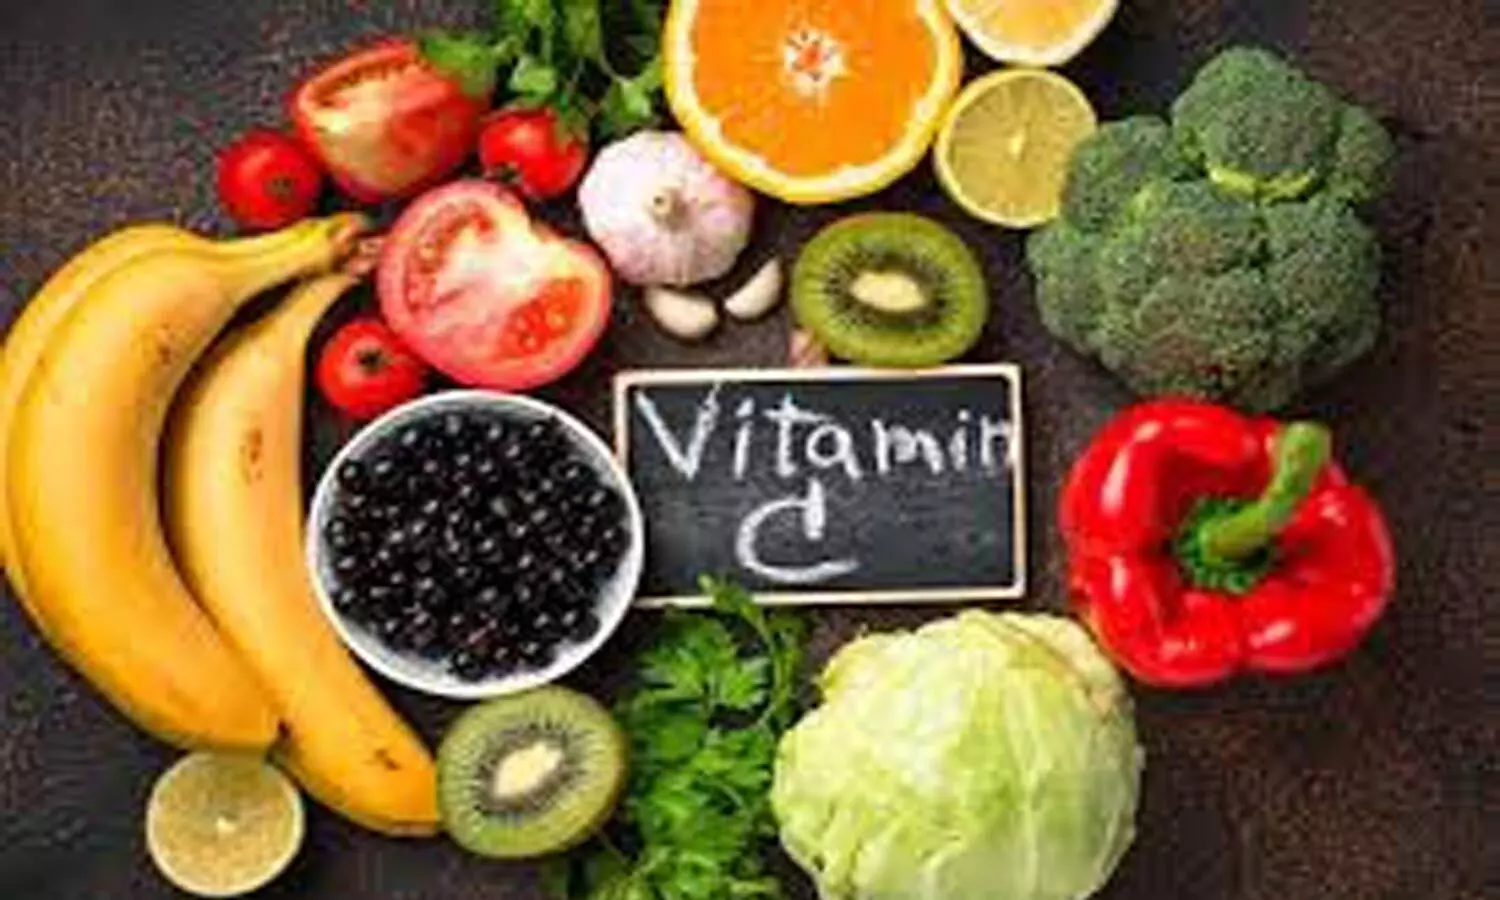 Vitamin C and  fasting combination may help treat aggressive cancers